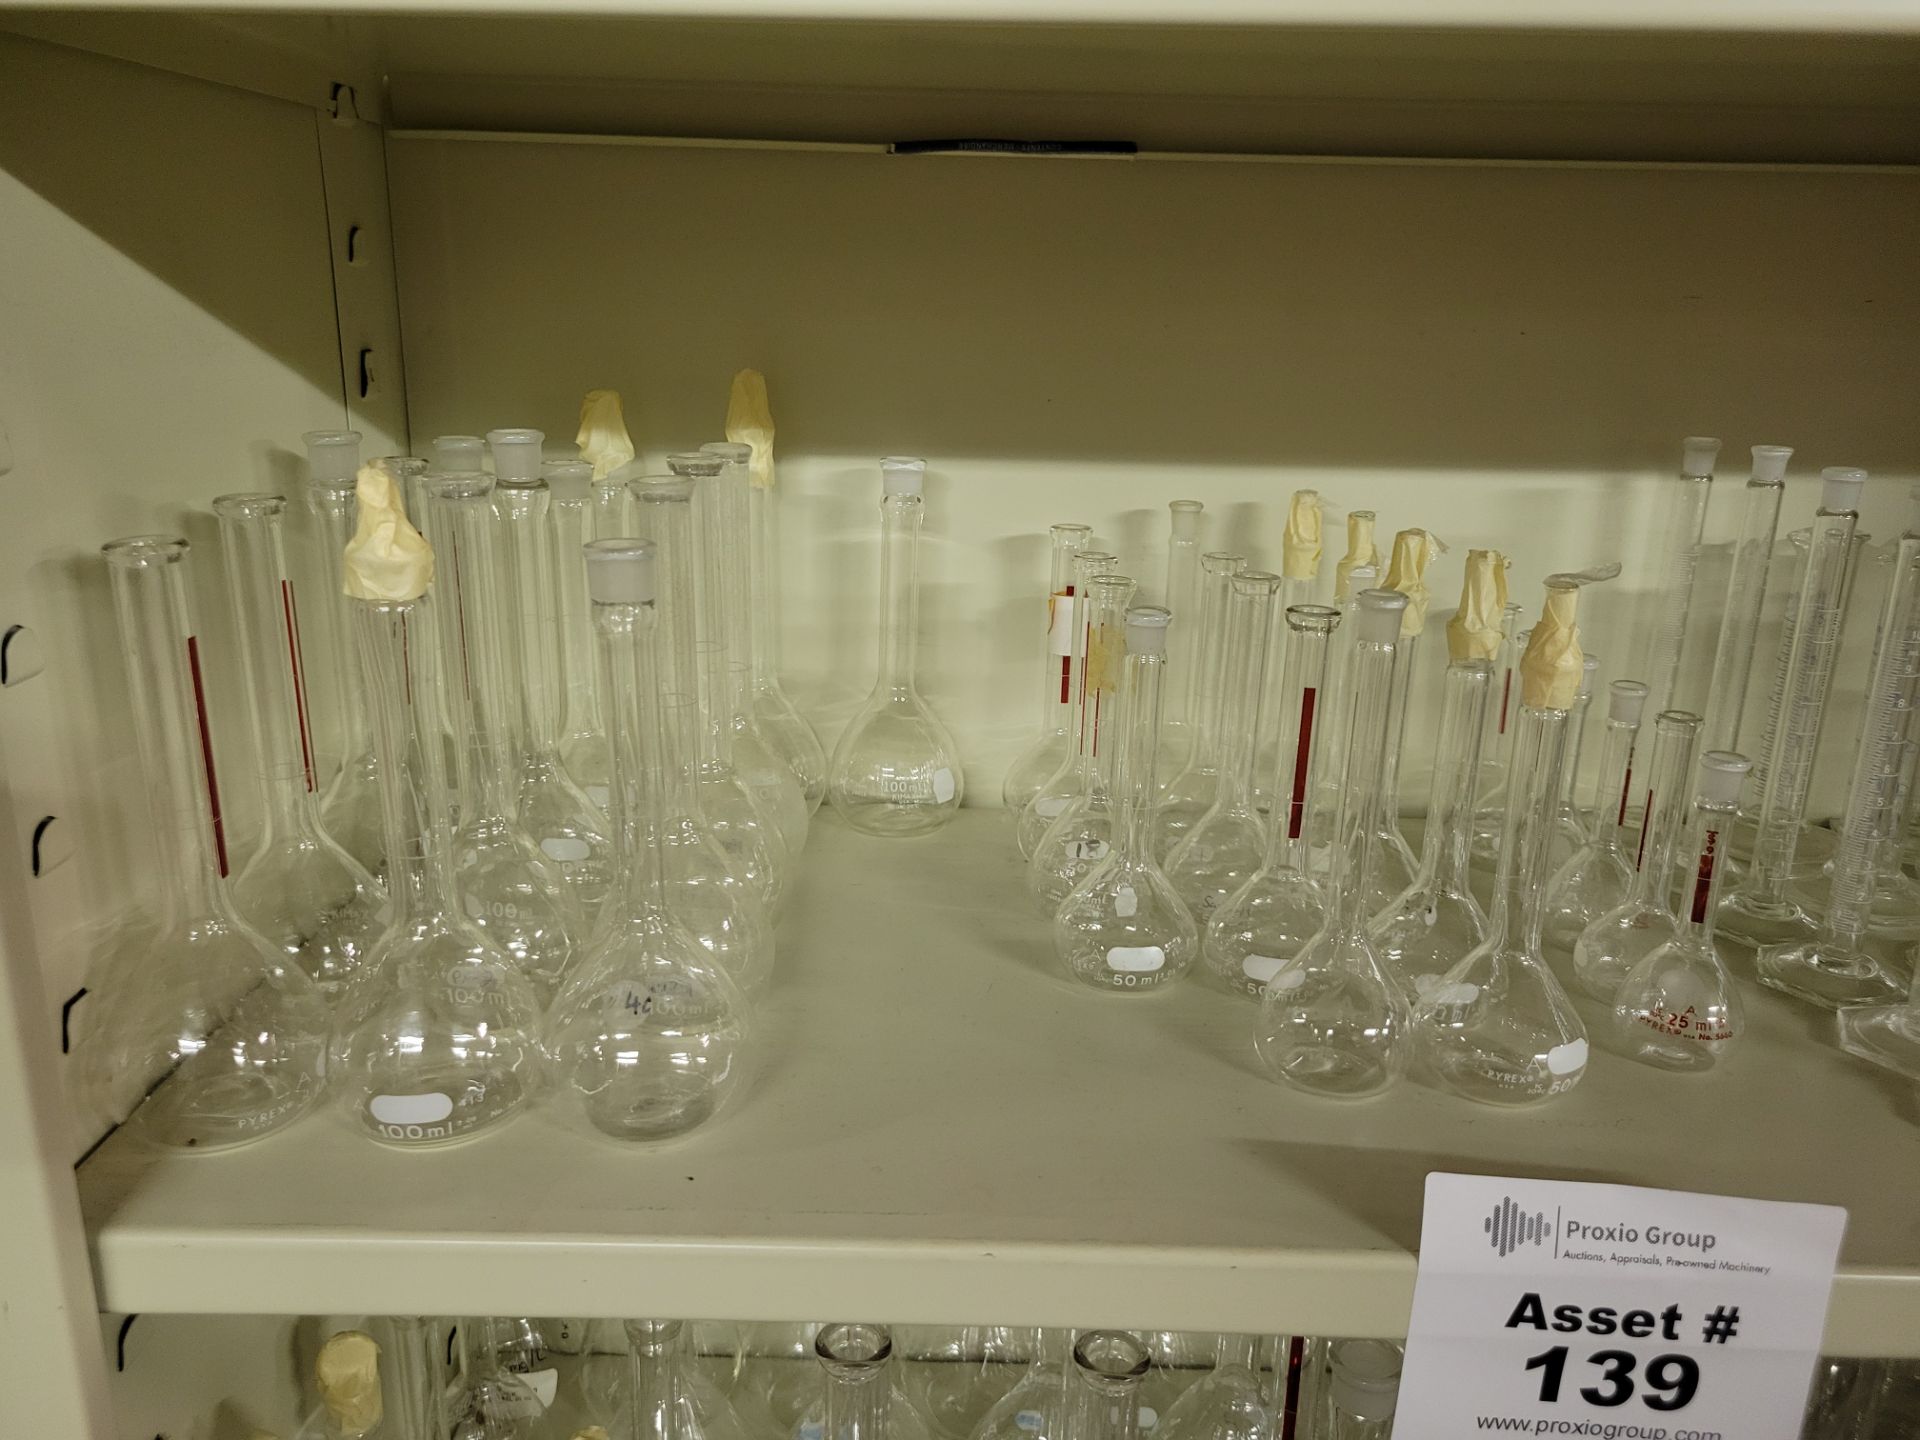 (2) Shelves of Various Sized and Manufacturer Glass Erlenmeyer Flasks Sizes Range From 25 to500mL - Image 2 of 5